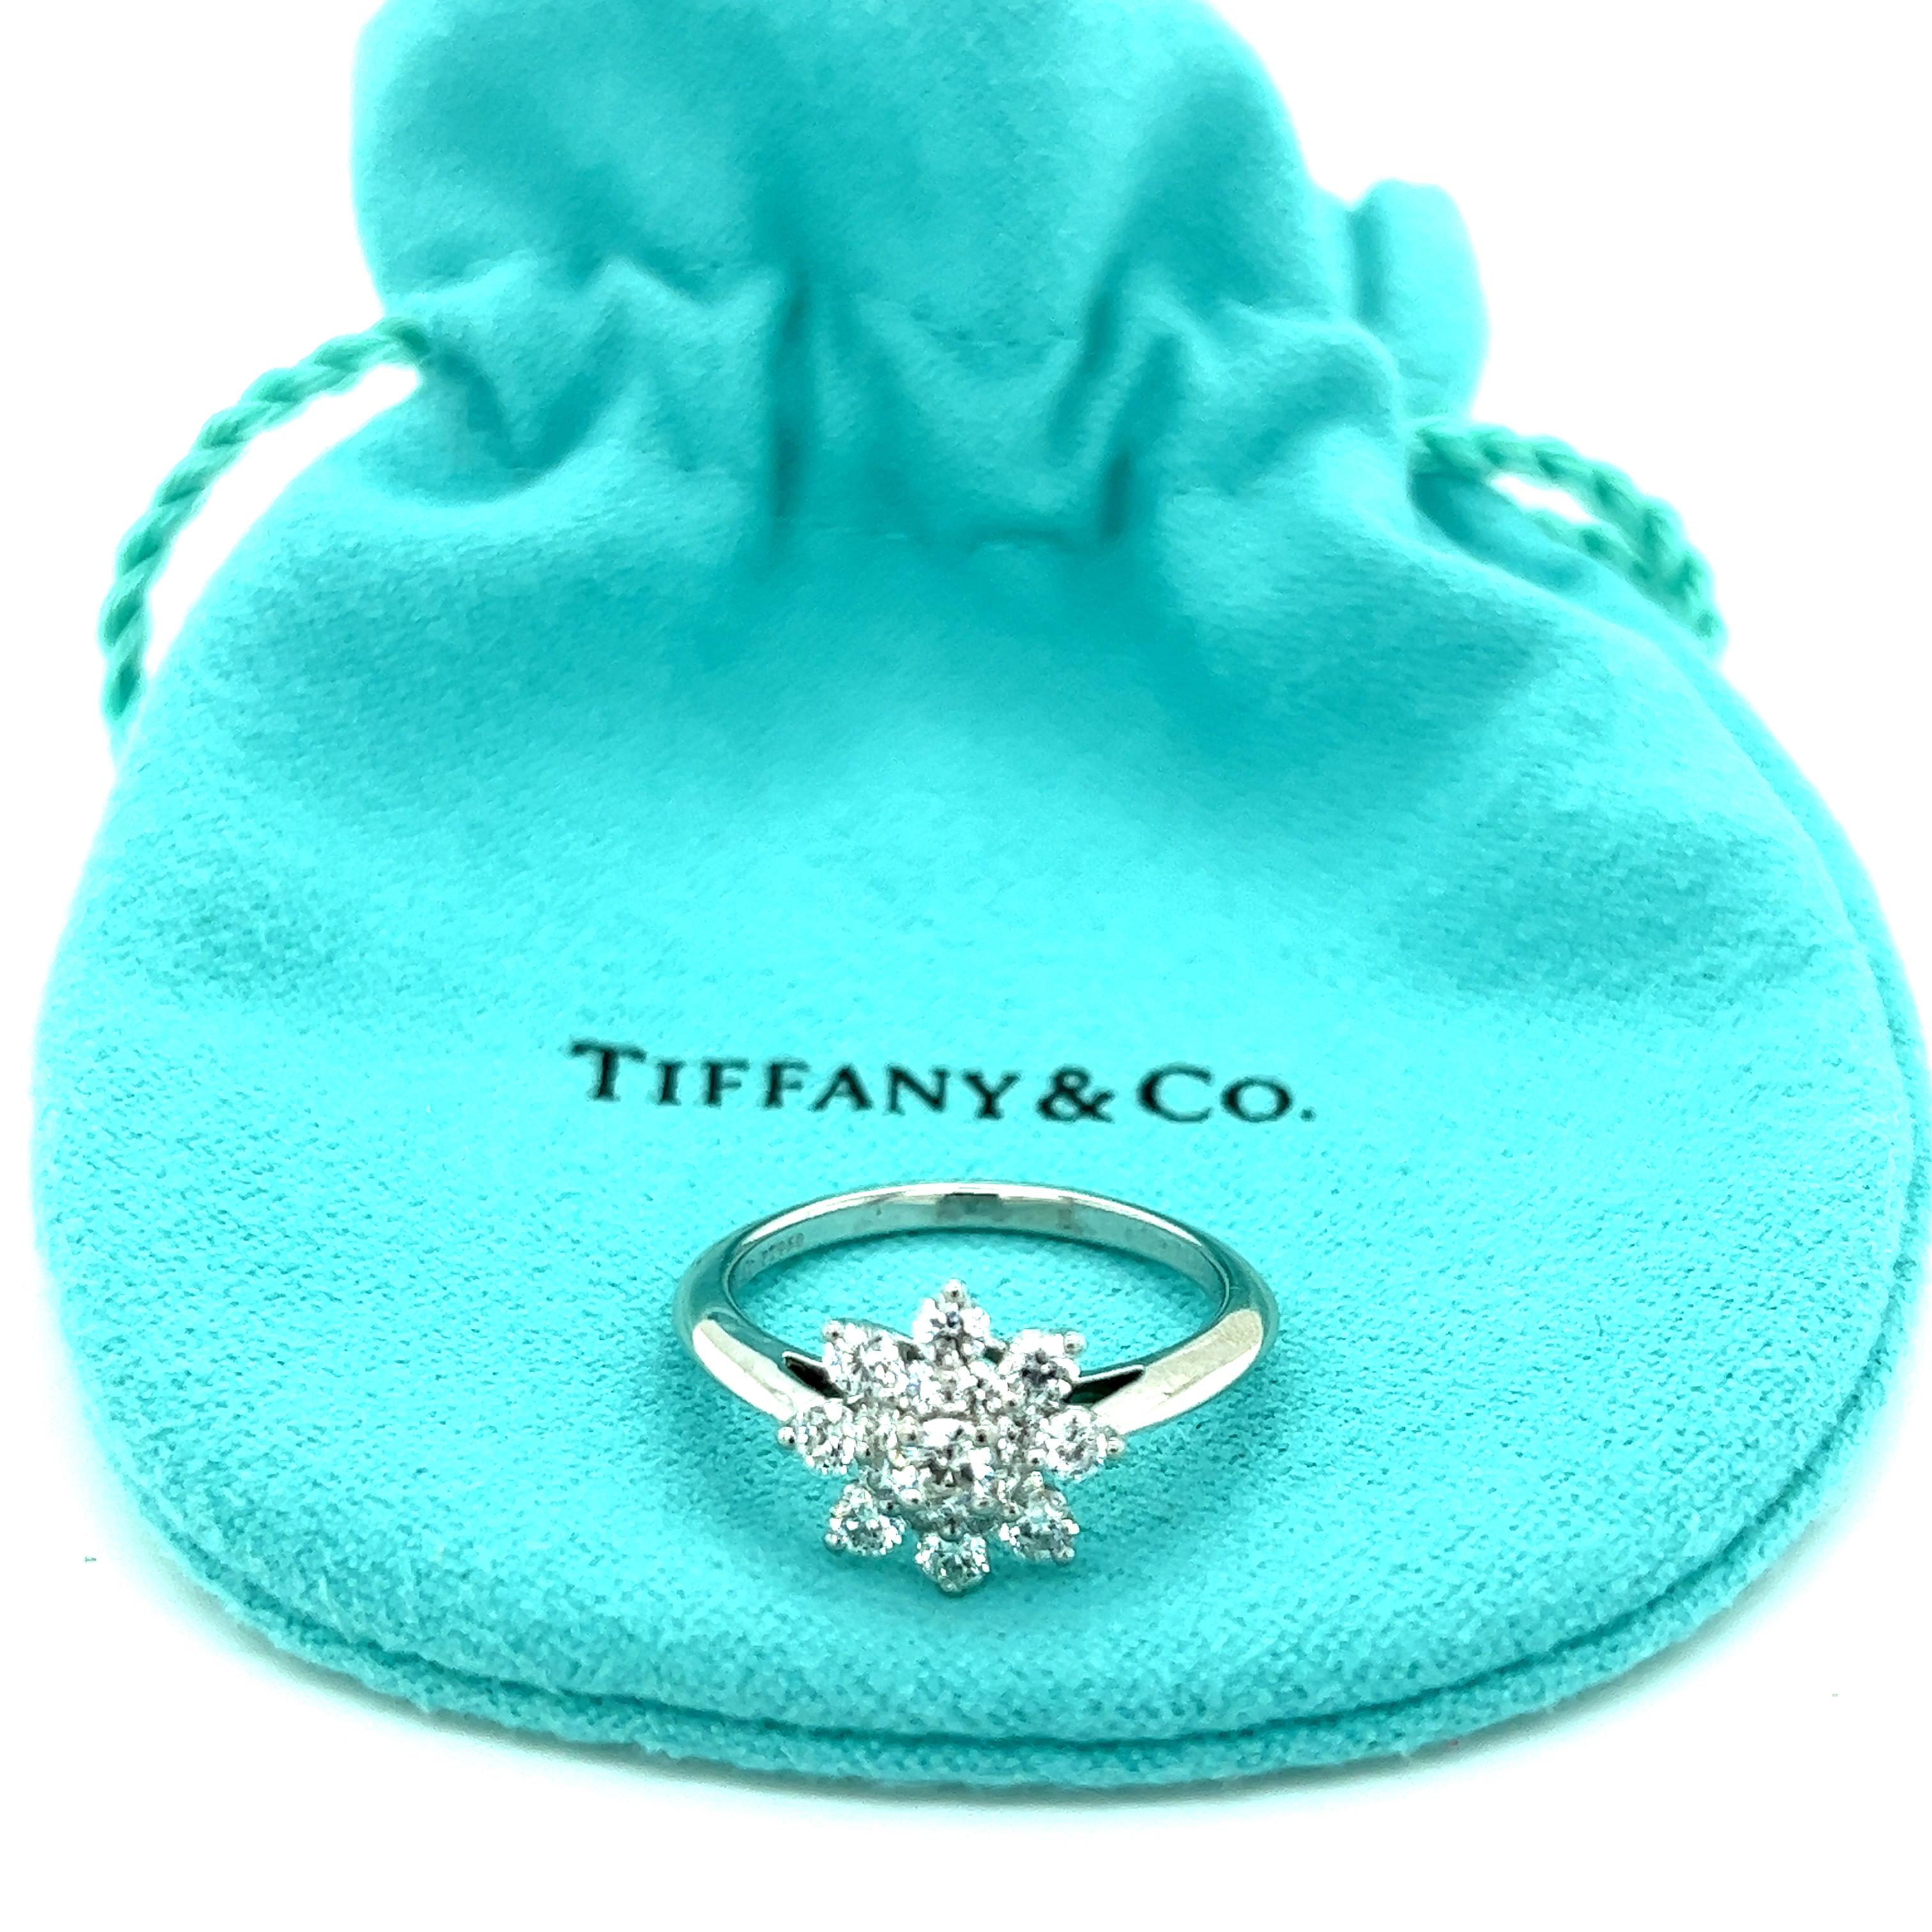 This gorgeous authentic ring is from Tiffany & Co. Crafted from platinum featuring a low bridge and knife's edge shank to tapered band. The top of the bridge has a beautiful snowflake shape flower set with sparkling round cut prong set diamonds. The